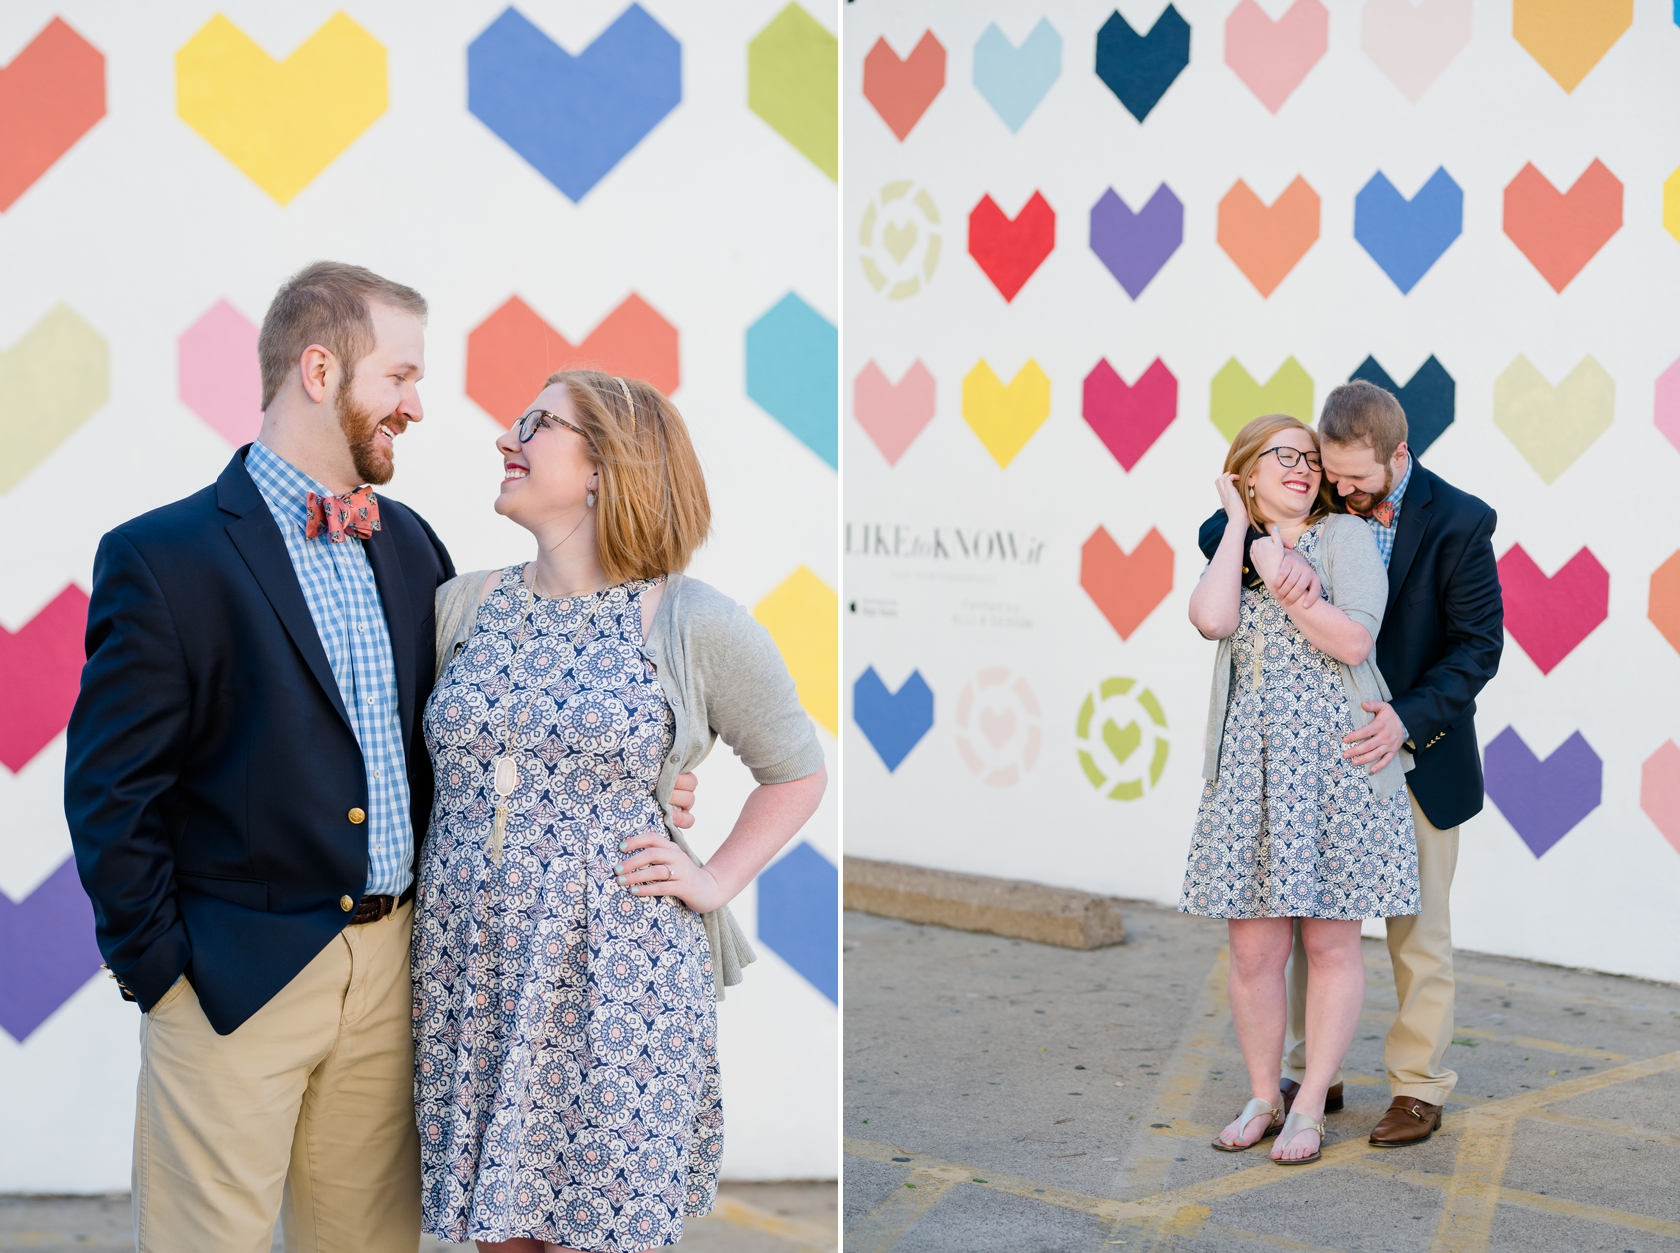 Engaged couple embracing in front of heart mural in Uptown Dallas